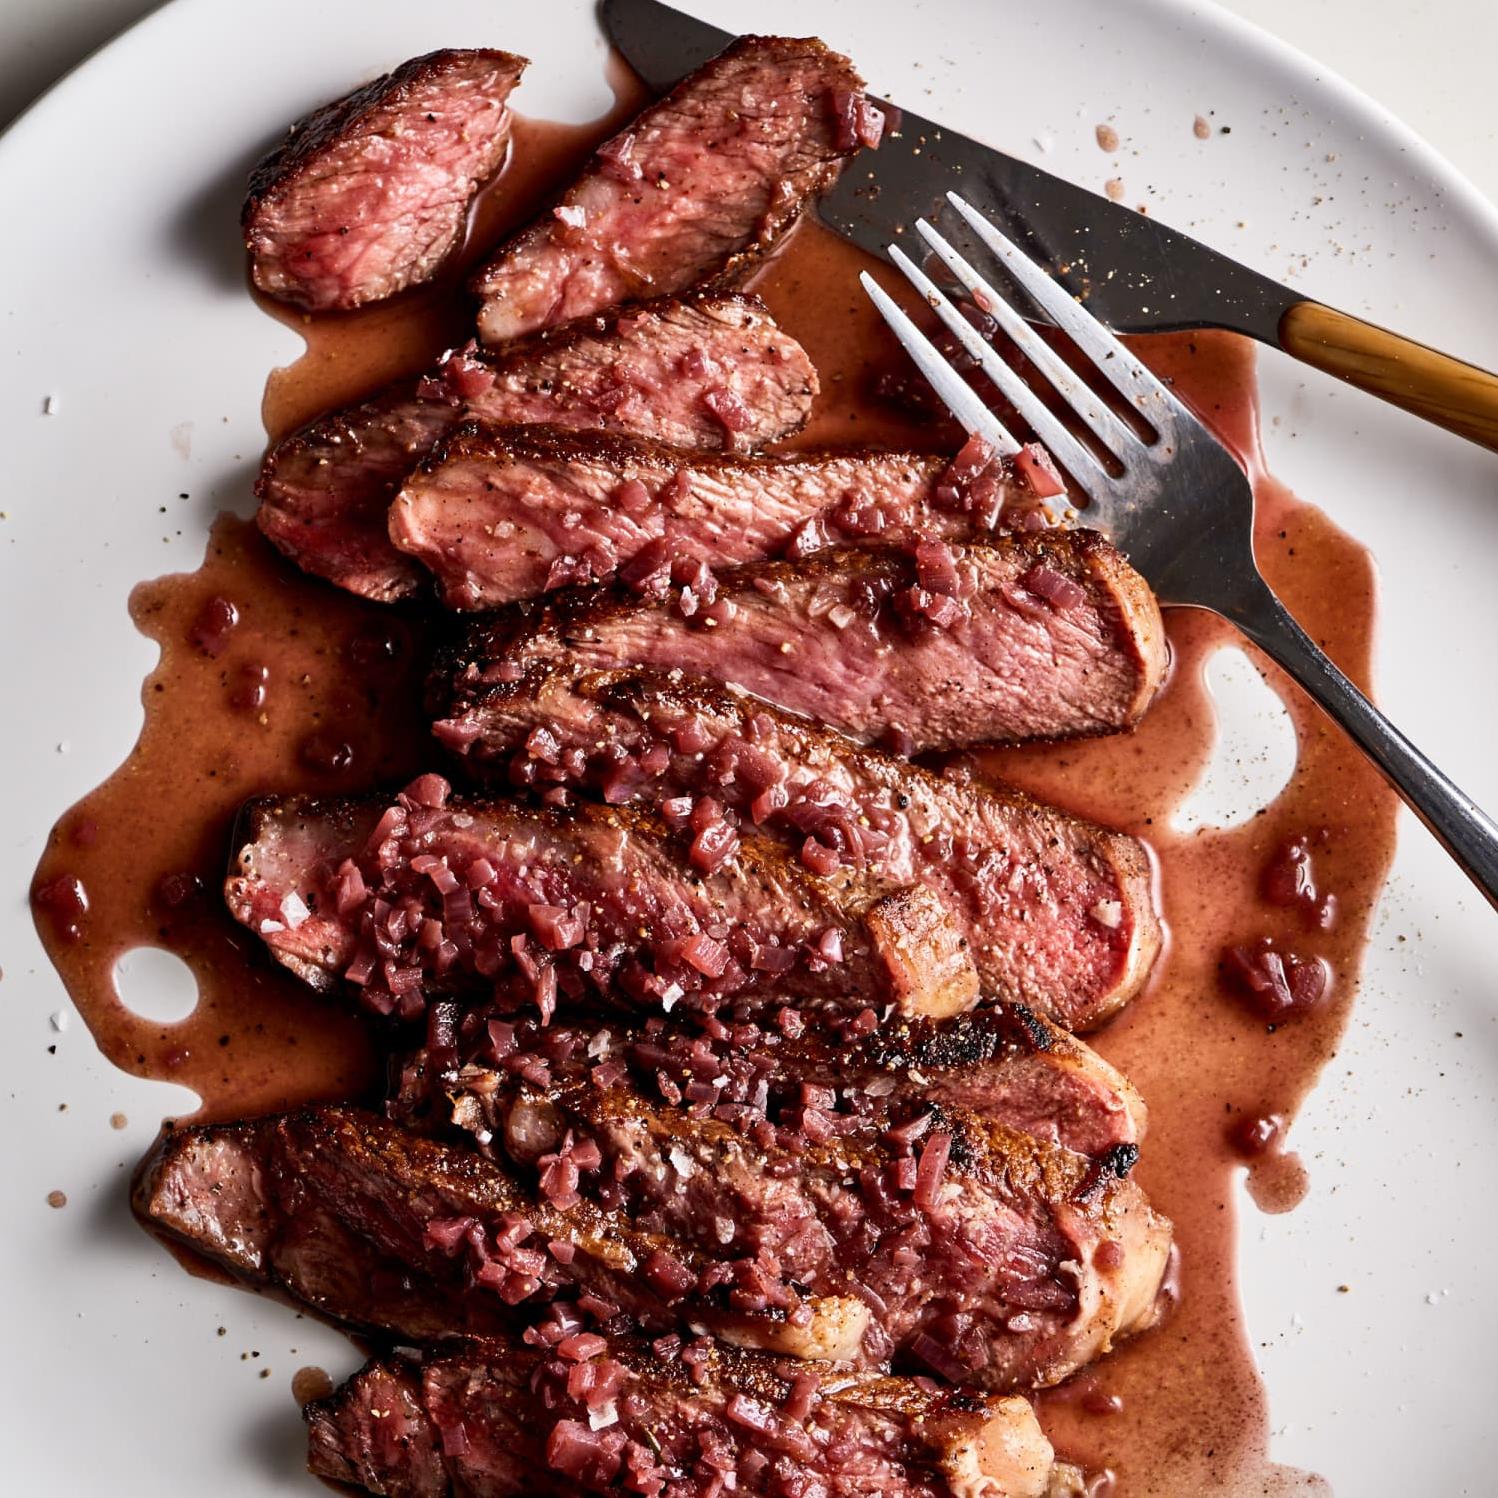  Nothing screams decadence and luxury like fillet steak with red wine sauce.